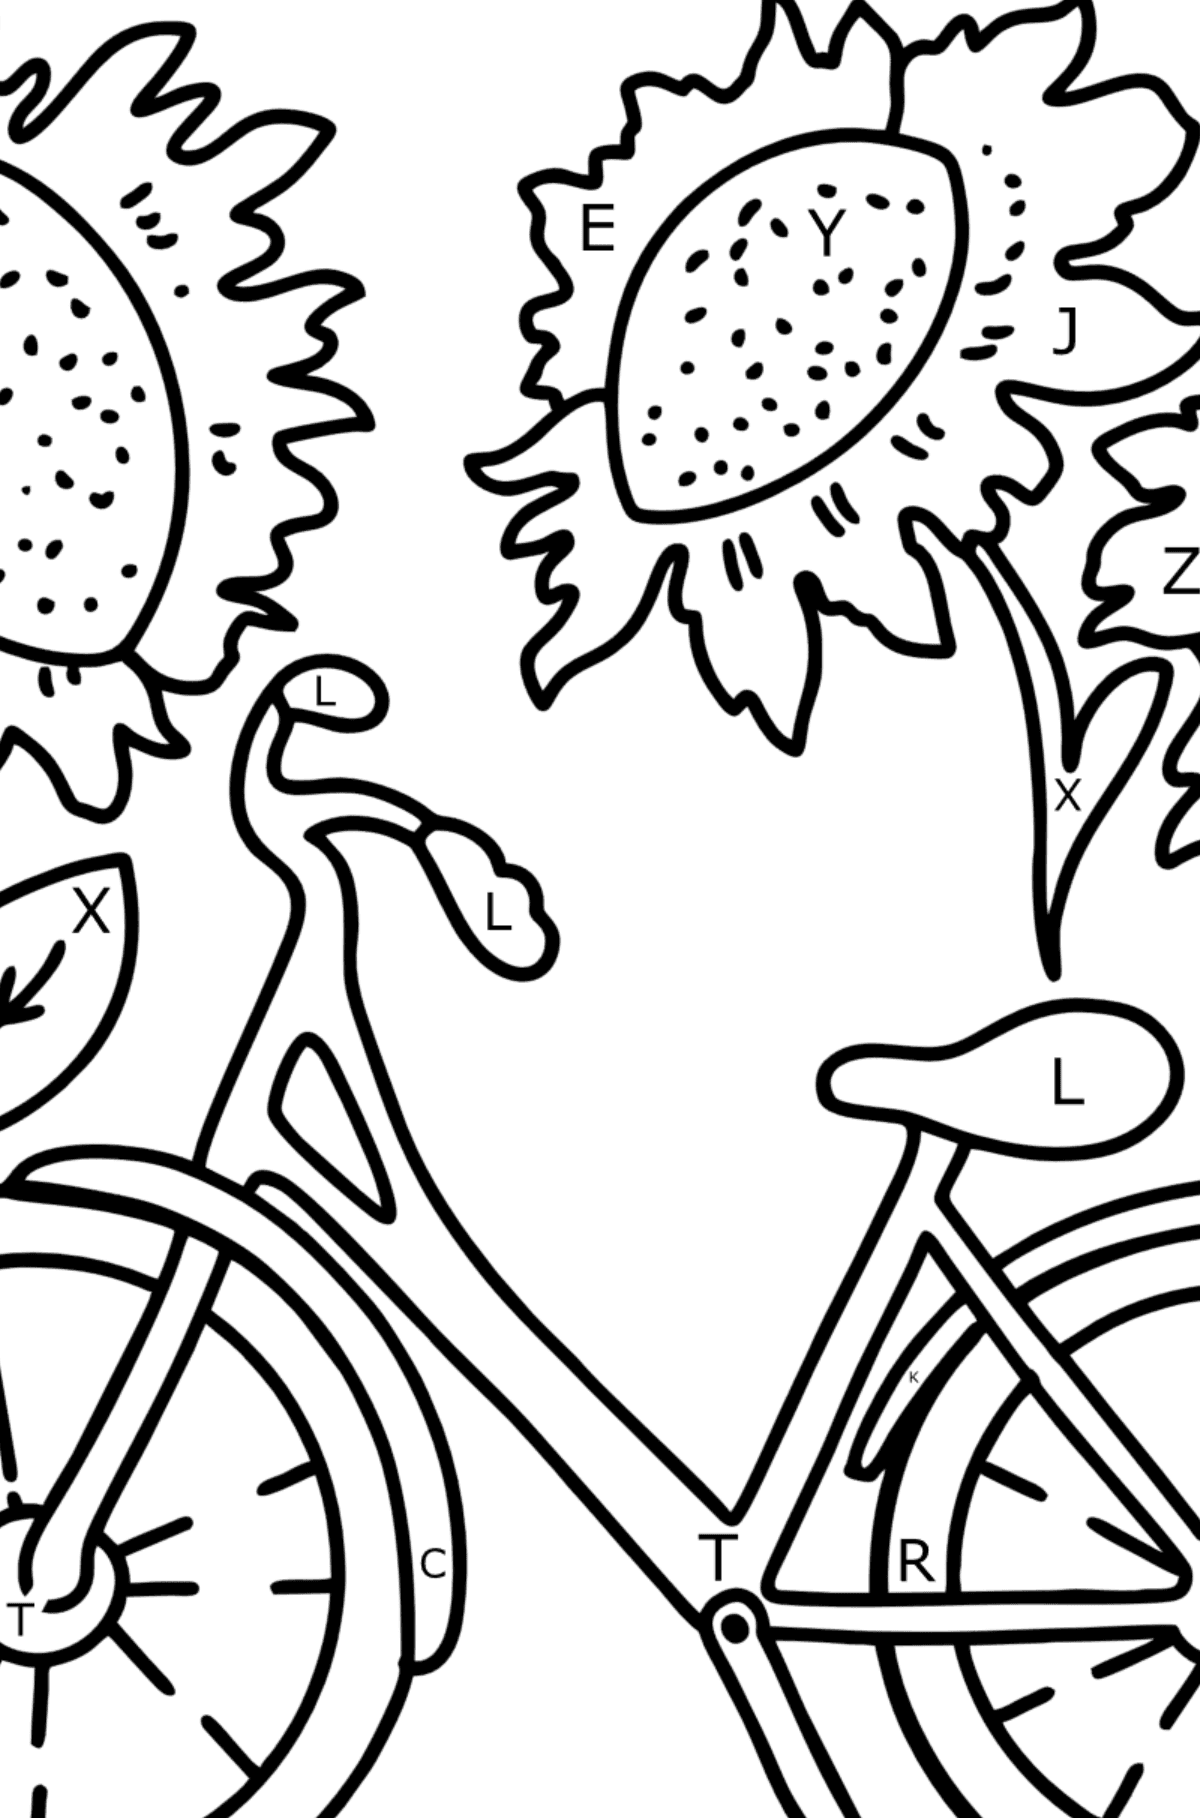 Summer Coloring page - Bicycle and Sunflowers - Coloring by Letters for Kids